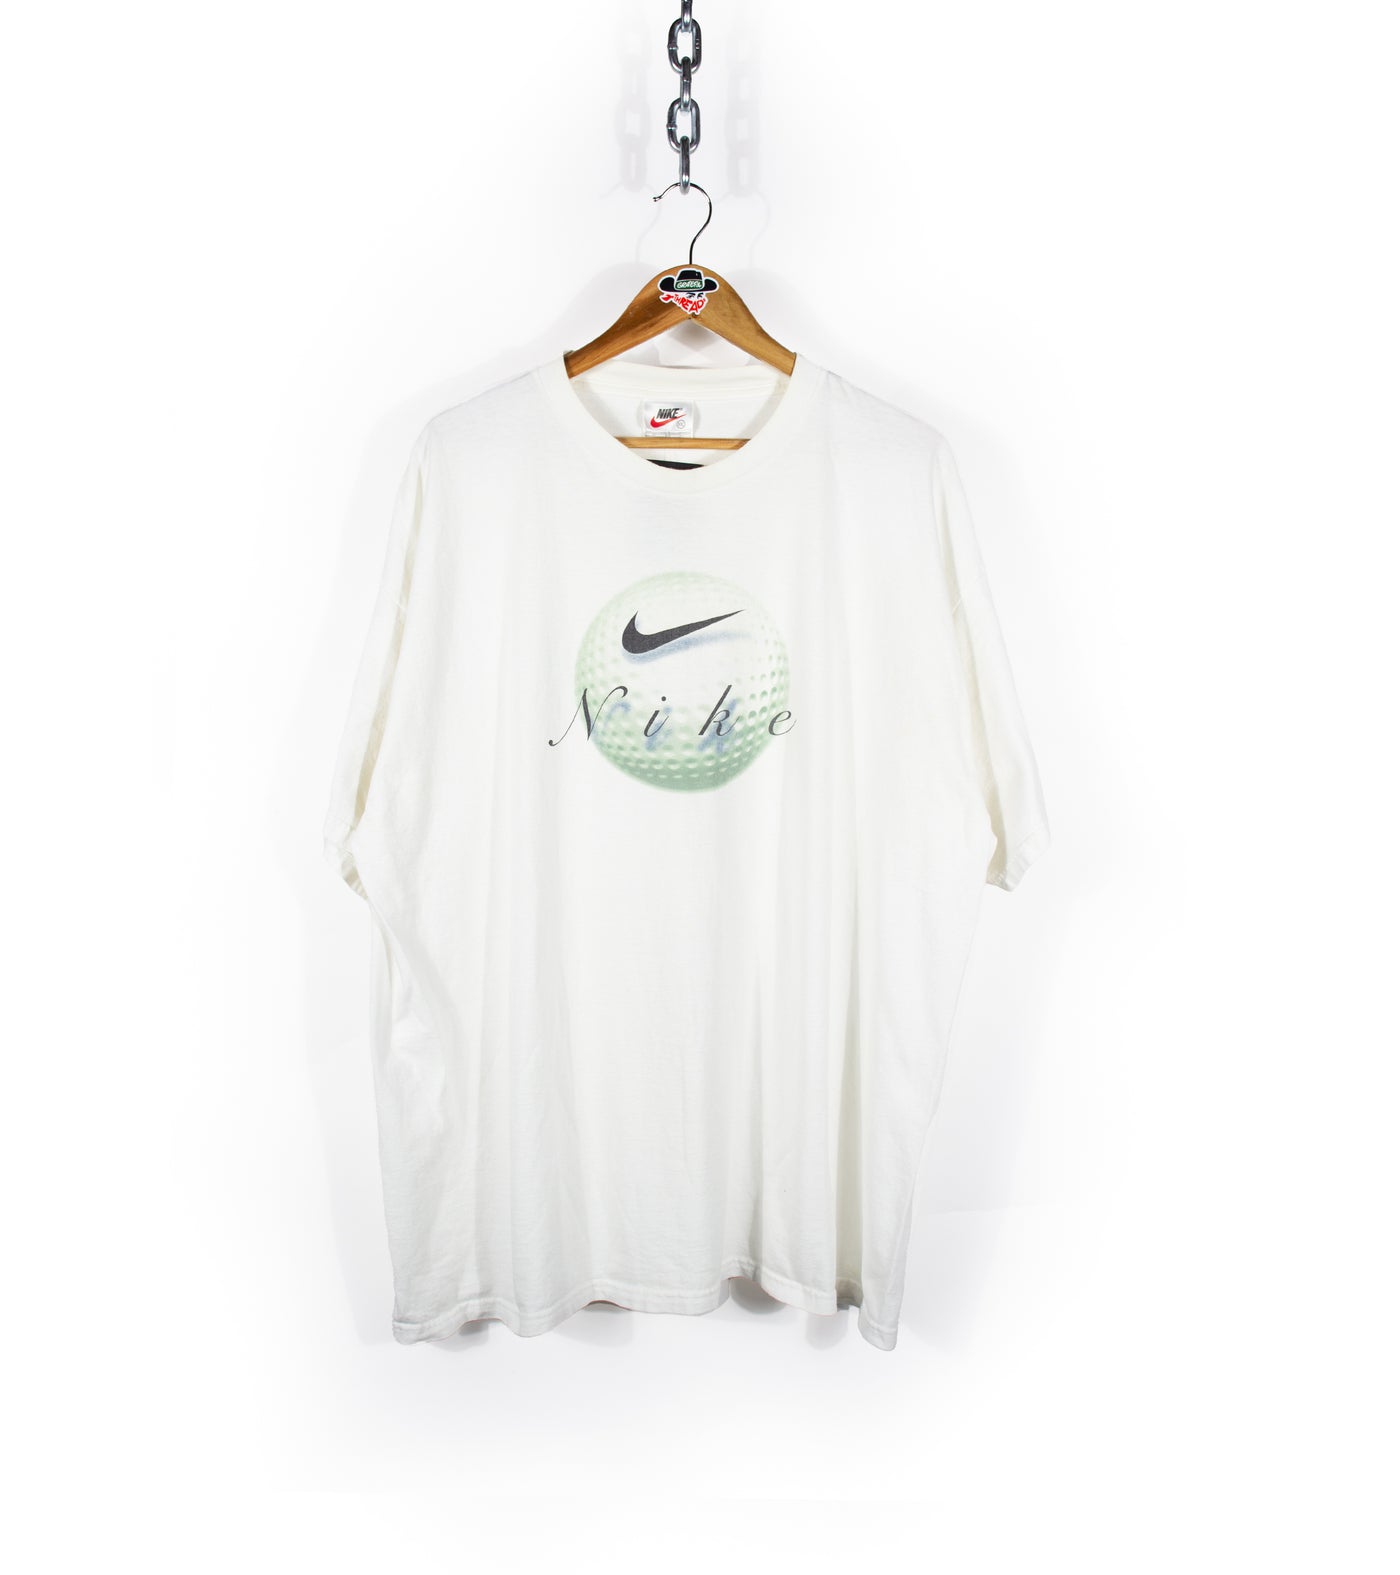 Vintage 90s Nike Golf Spellout T-Shirt